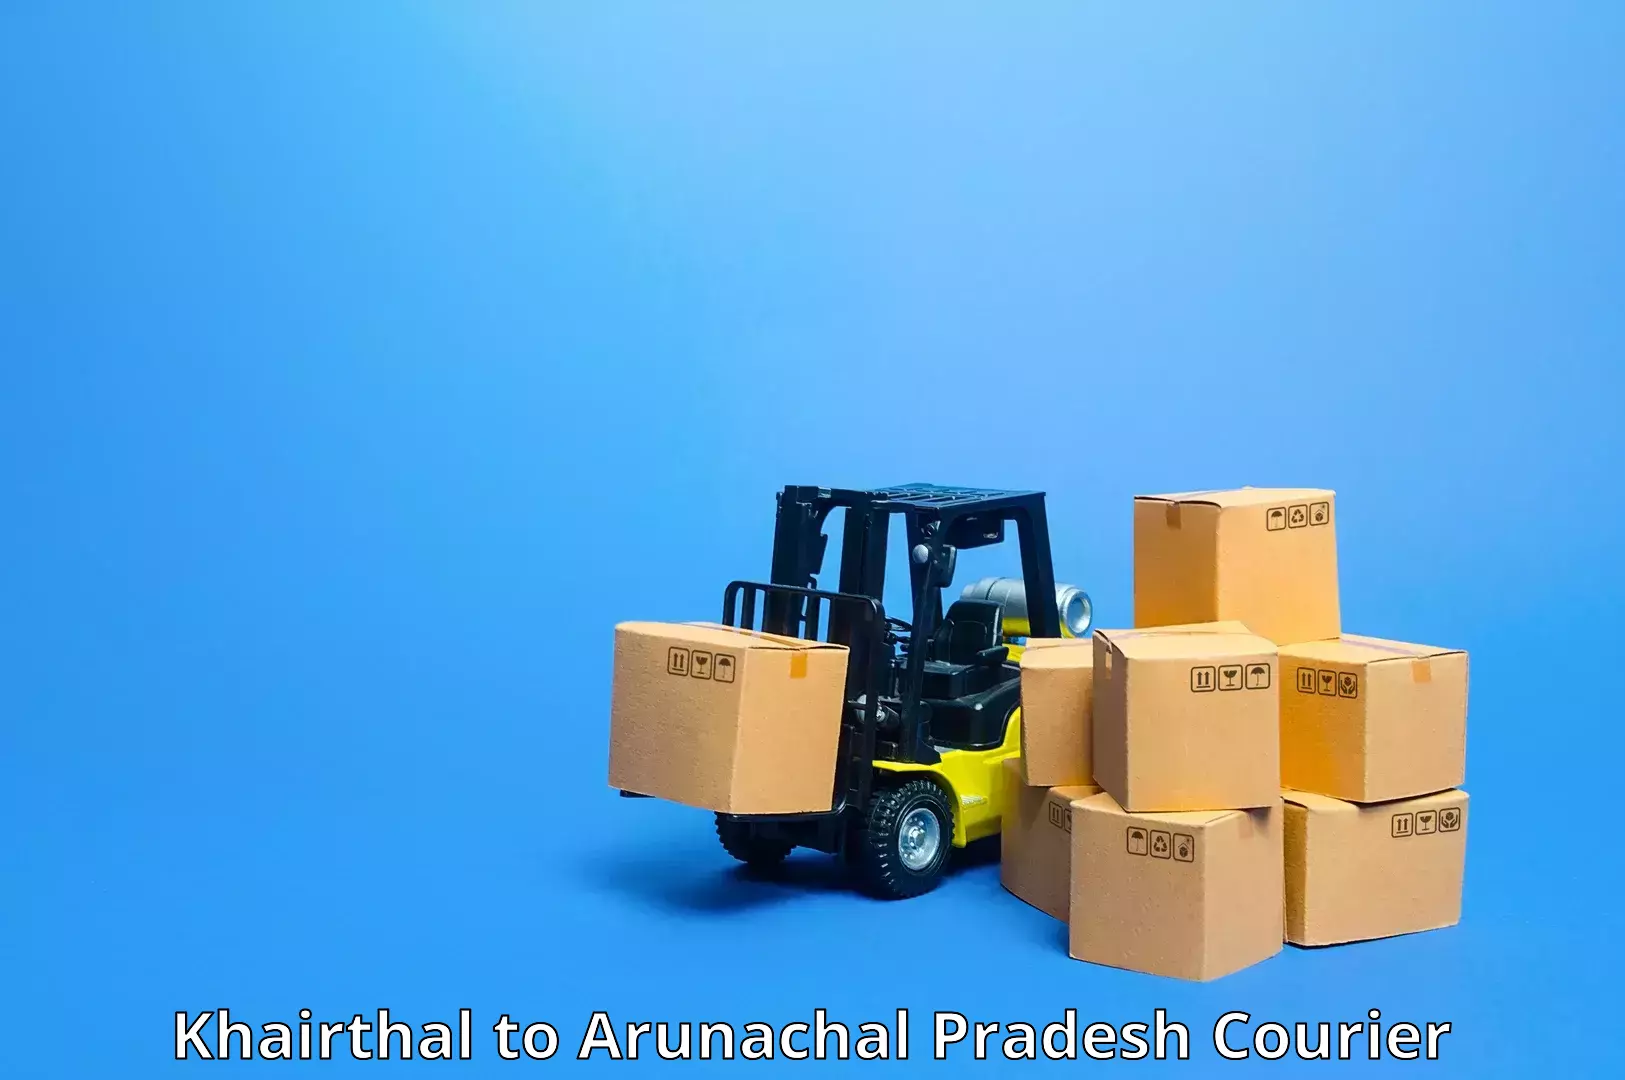 Nationwide shipping coverage Khairthal to Lohit